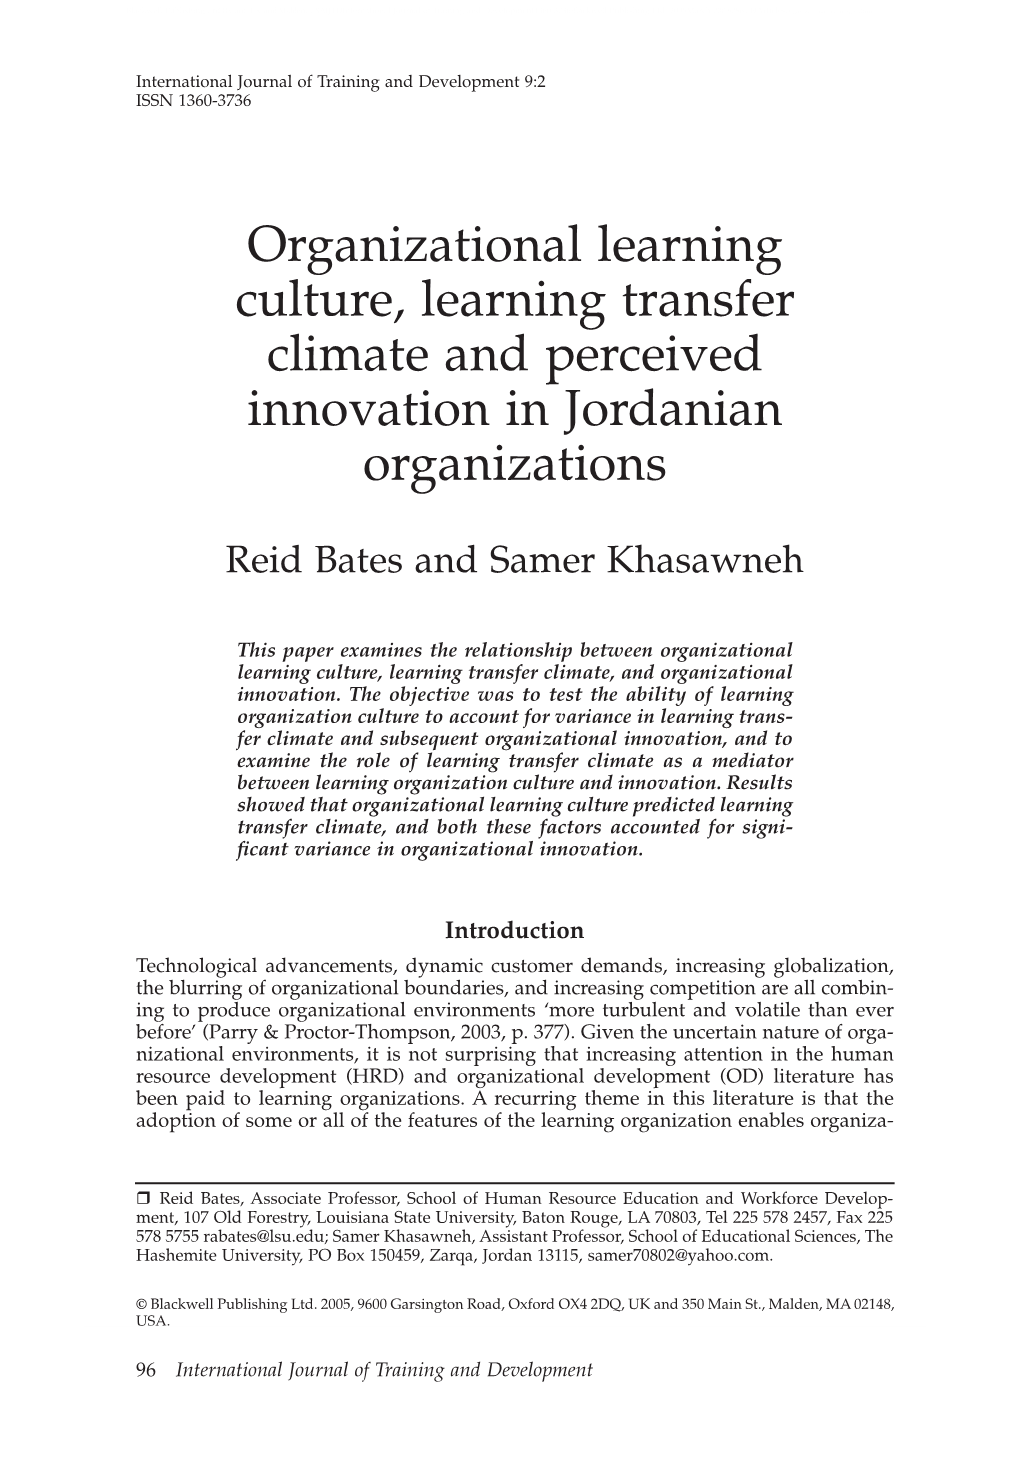 Organizational Learning Culture, Learning Transfer Climate and Perceived Innovation in Jordanian Organizations